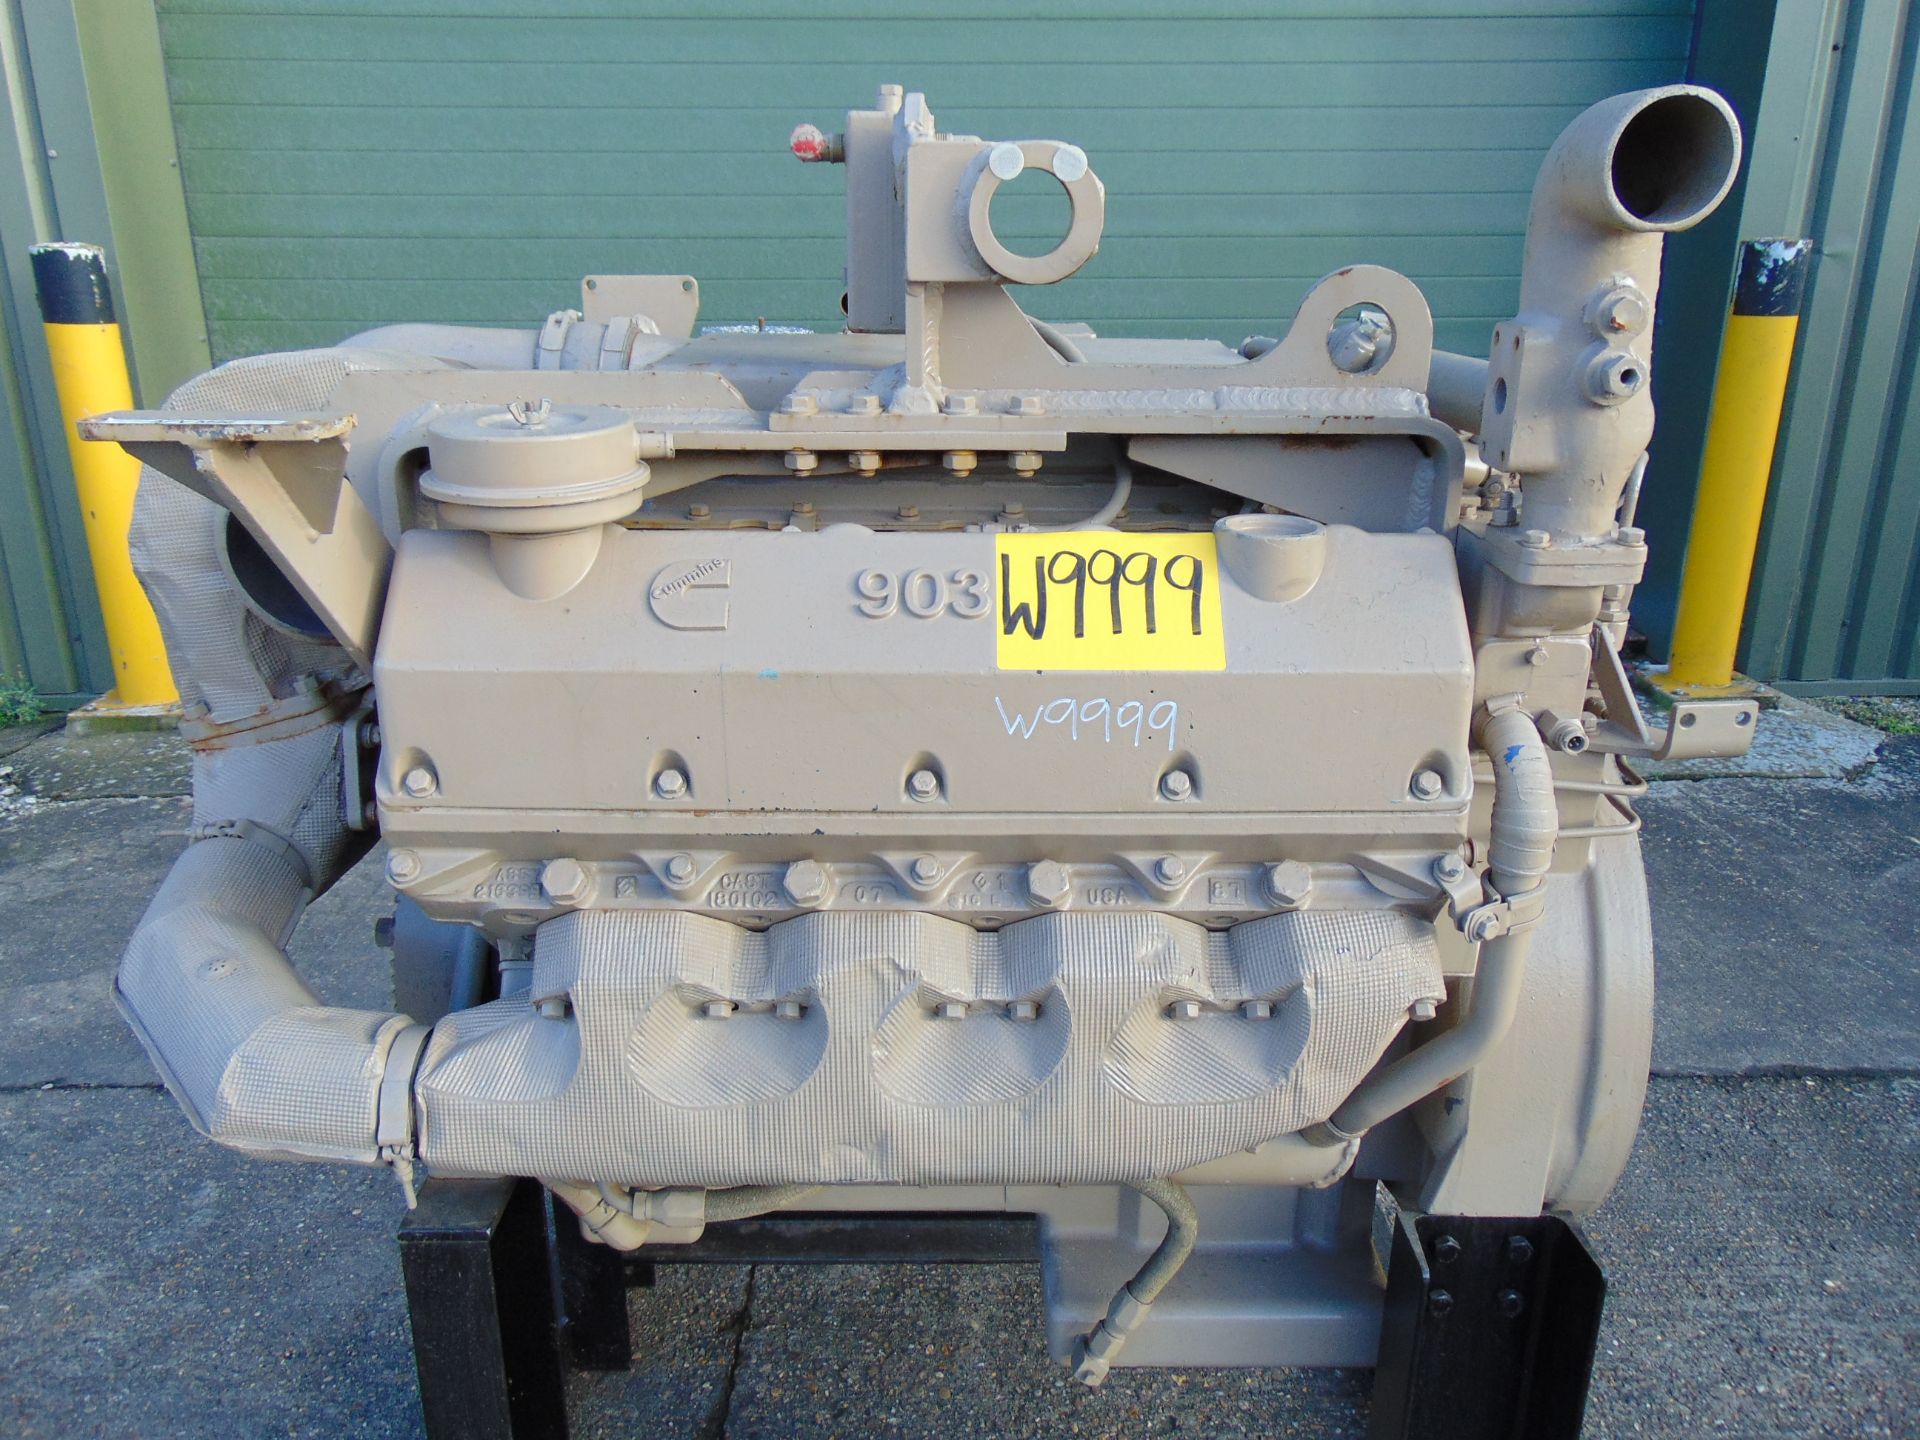 A1 Reconditioned Cummins 903 Turbo Diesel Engine - Image 2 of 18